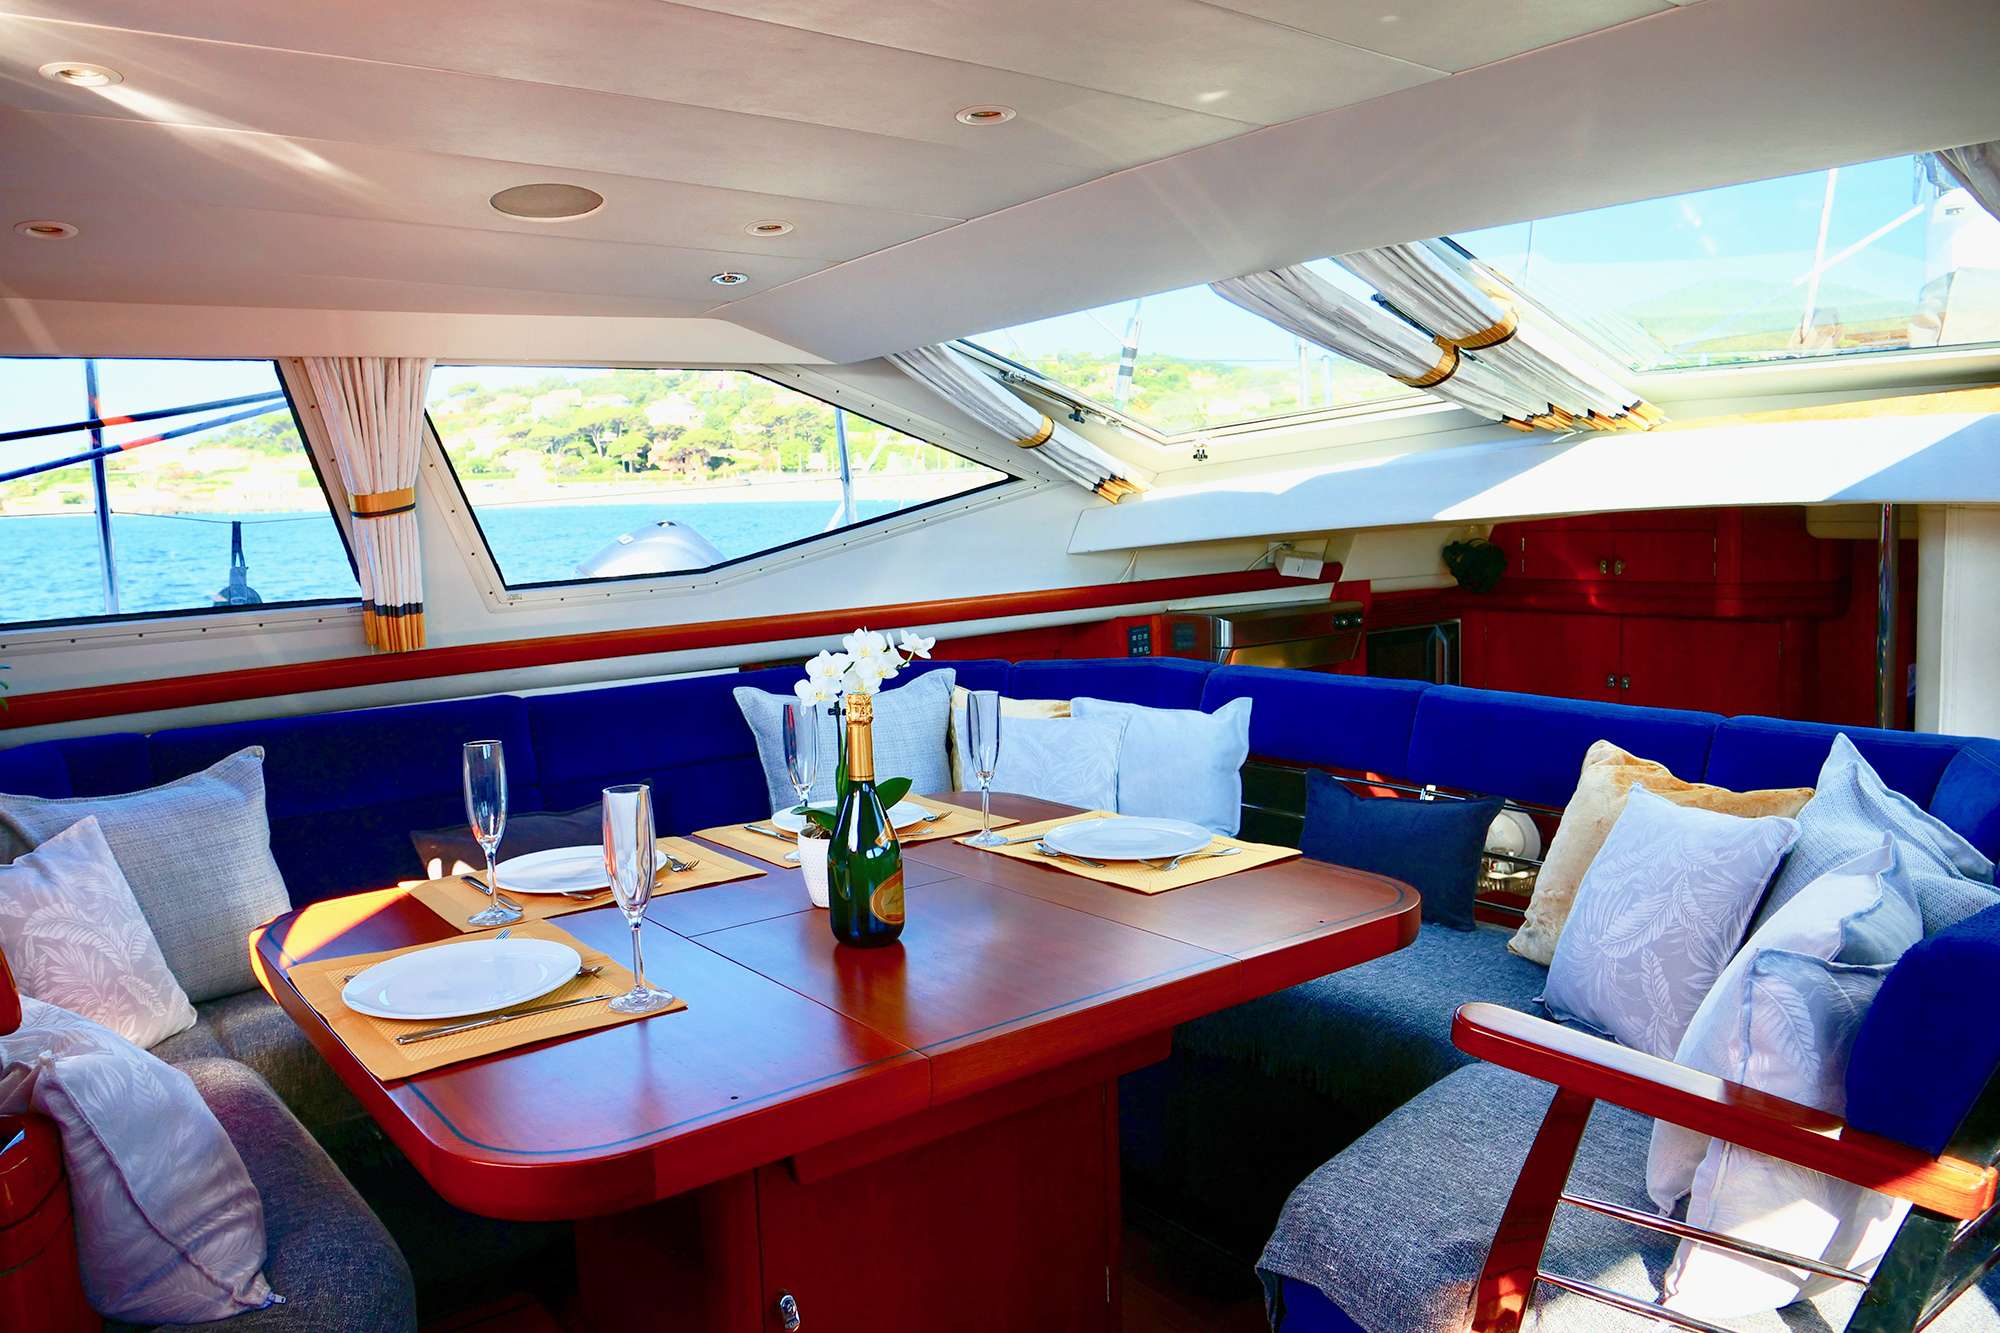 Sailing Yacht 'ELVIS MAGIC' Formal Dining Area, 6 PAX, 2 Crew, 66.00 Ft, 20.00 Meters, Built 2003, Oyster Marine, Refit Year 2012 - Main engine - Perkins Sabre 225ti 2016 - Generator - Northern lights 11kw, Bow thruster hydraulic motor and blades 2017 - R